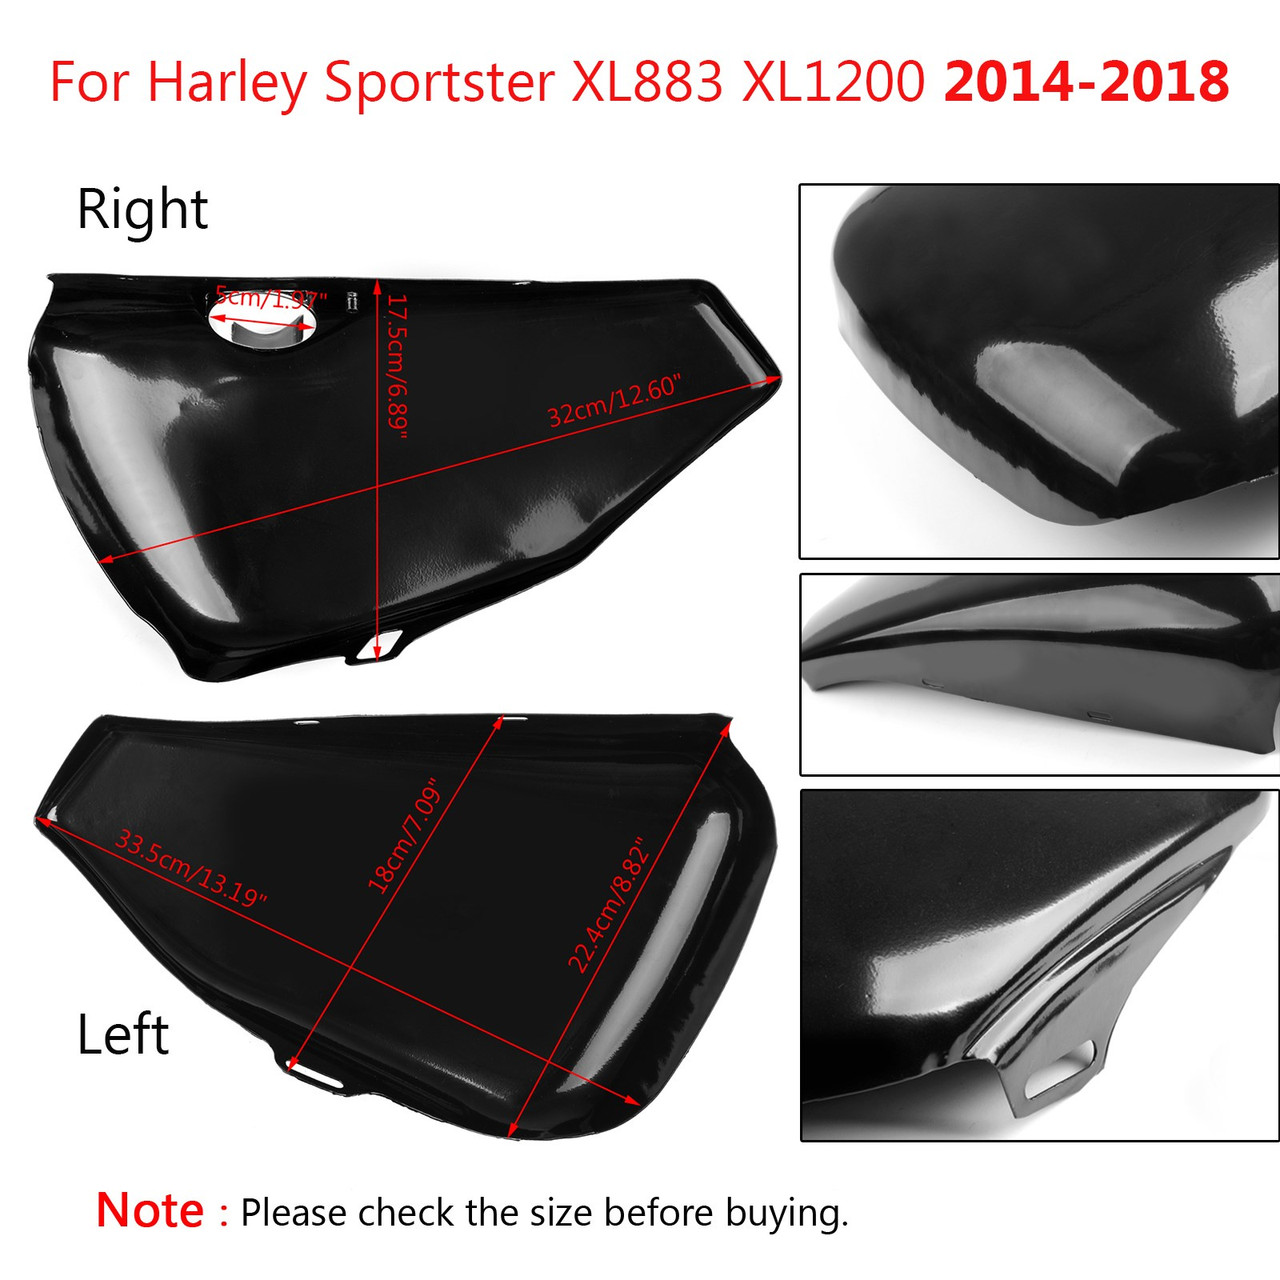 1 pair L&R Side Battery Cover Fit For Harley Sportster XL883 XL1200 2004-2013